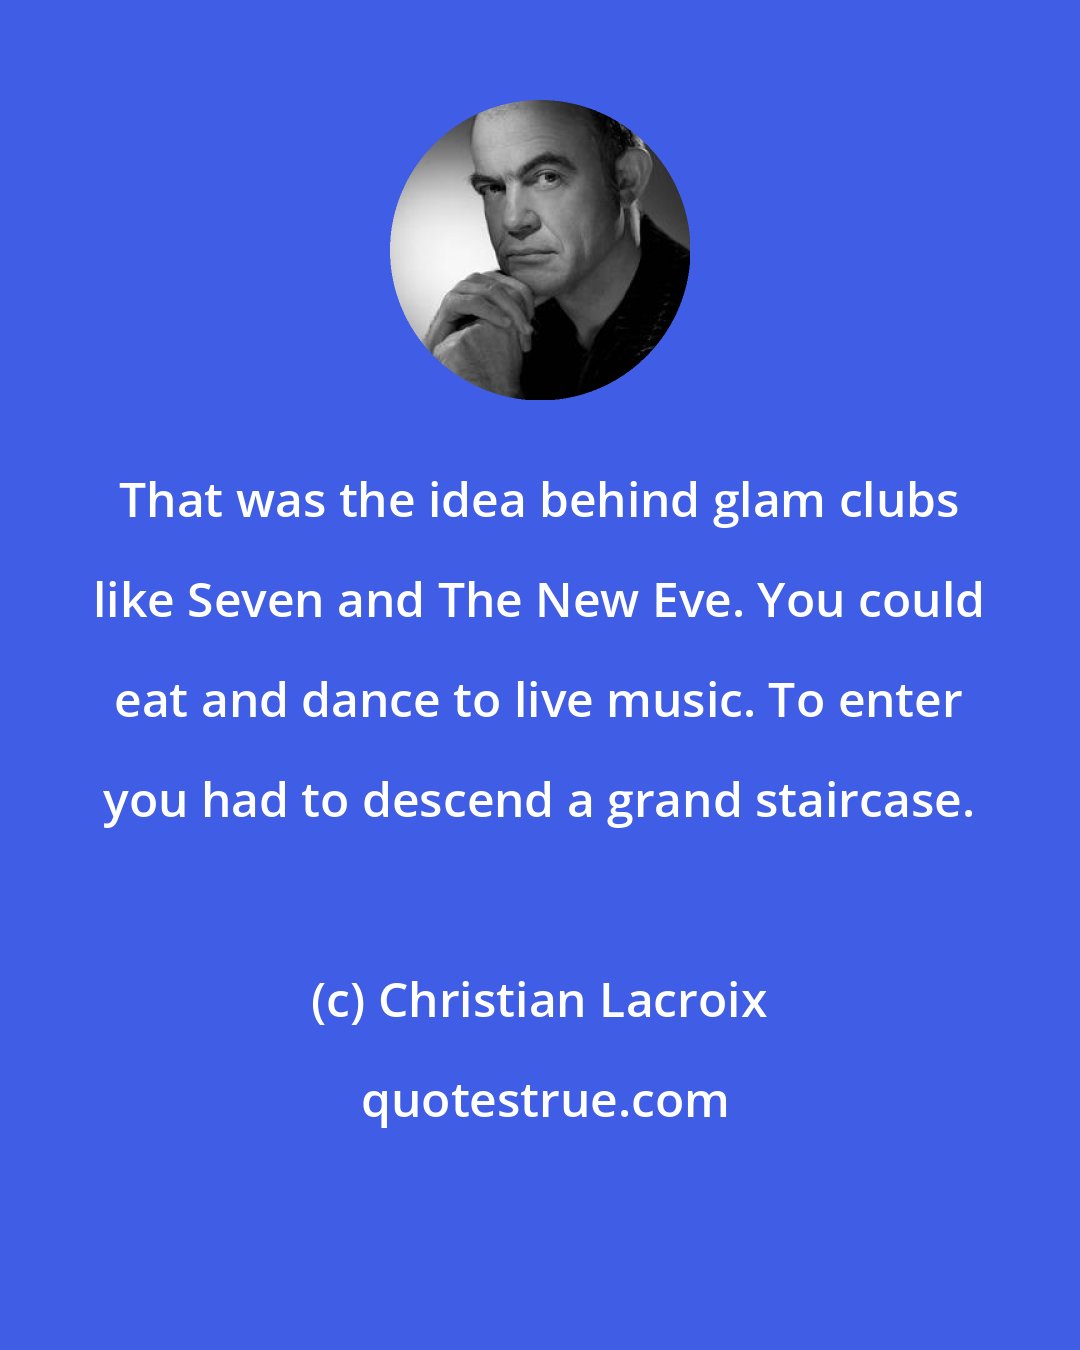 Christian Lacroix: That was the idea behind glam clubs like Seven and The New Eve. You could eat and dance to live music. To enter you had to descend a grand staircase.